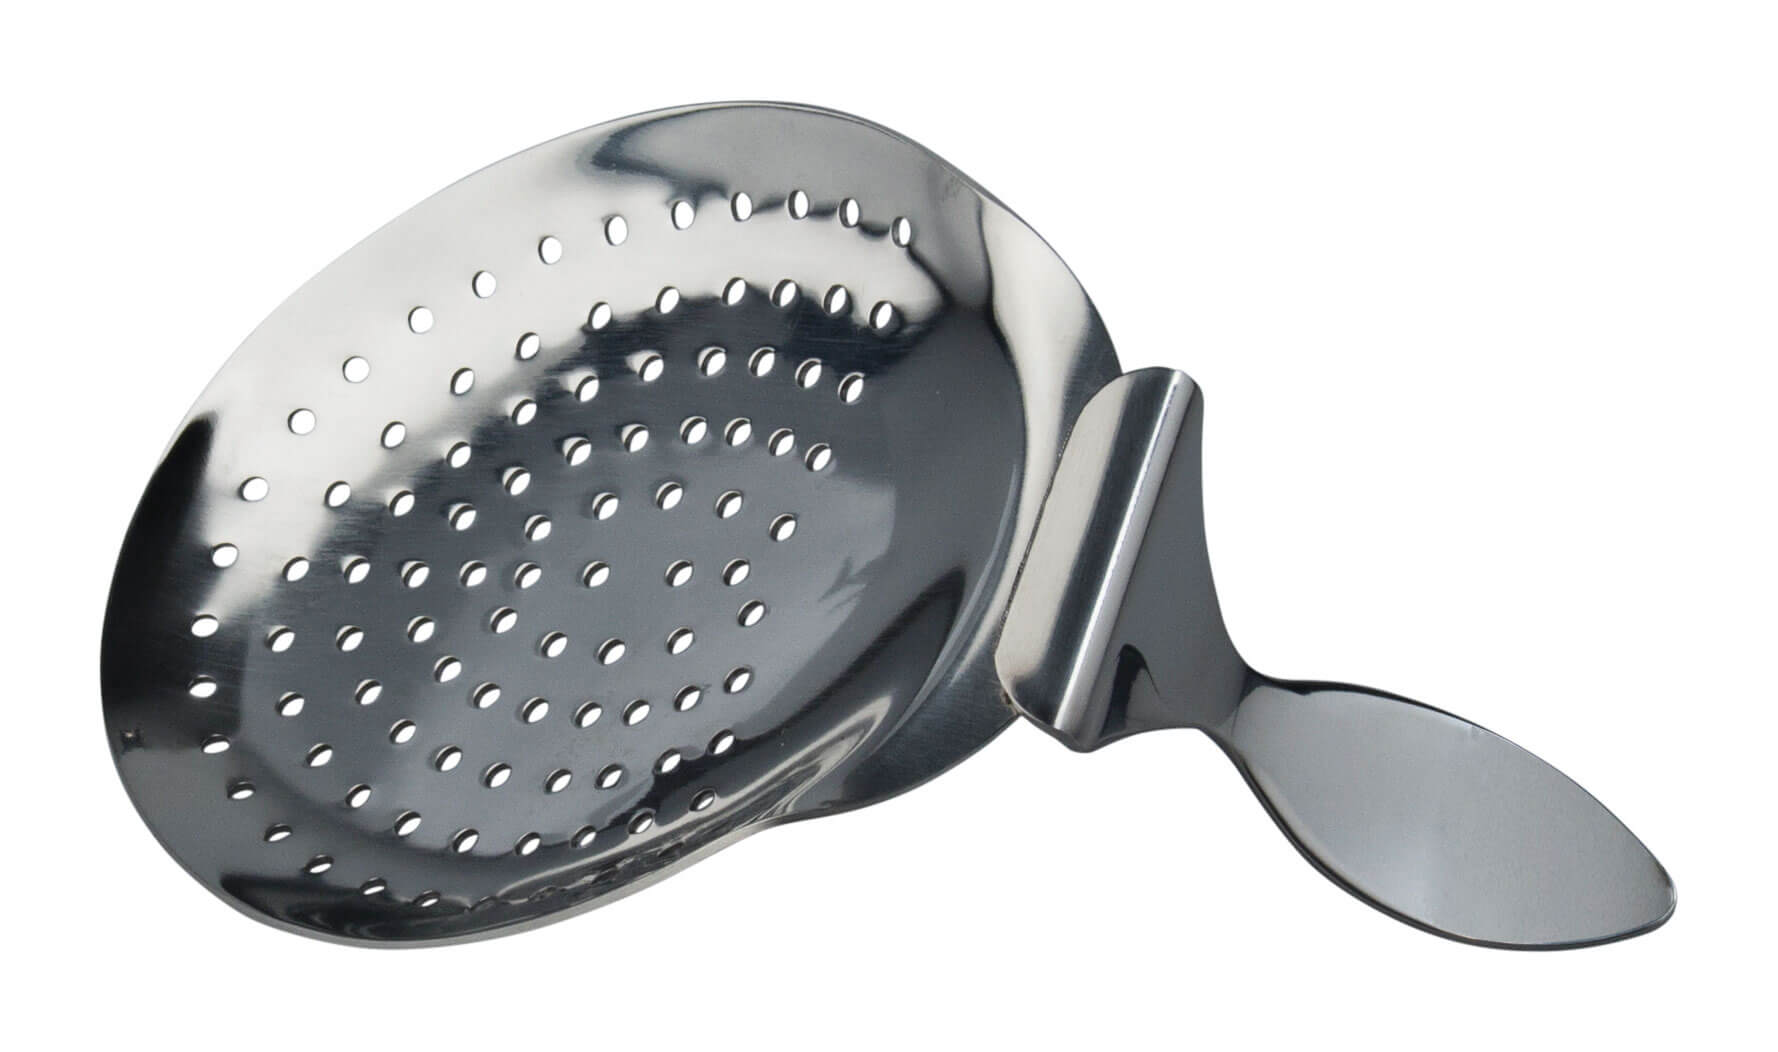 Julep strainer, curved handle - stainless steel